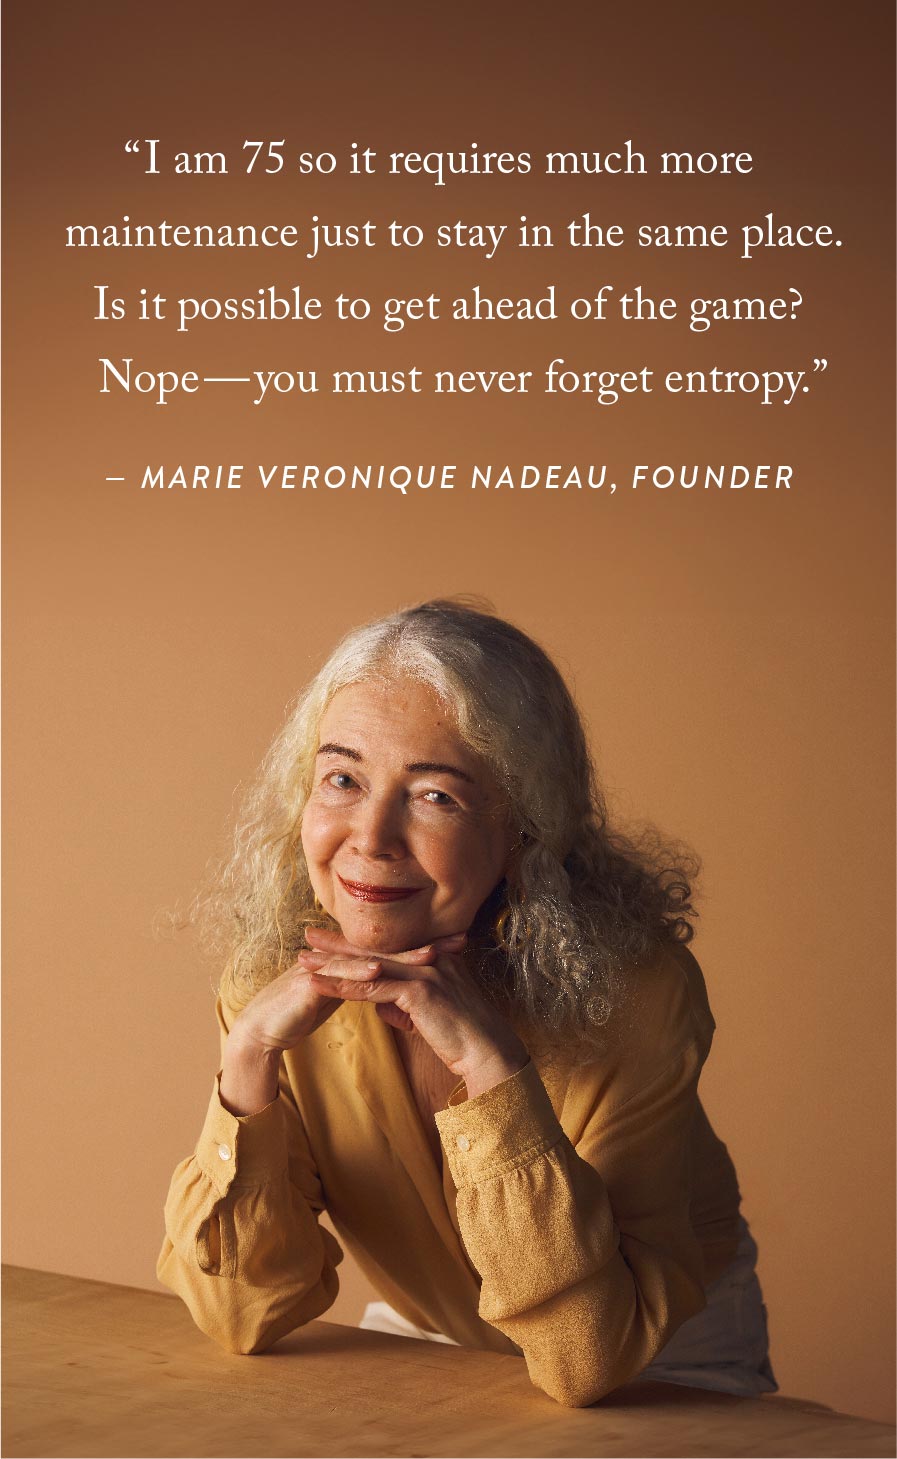 "I am 75 so it requires much more maintenance just to stay in the same pklace. Is it possible to get ahead of the game? Nope--you must never forget entropy." - Marie Veronique Nadeau, Founder